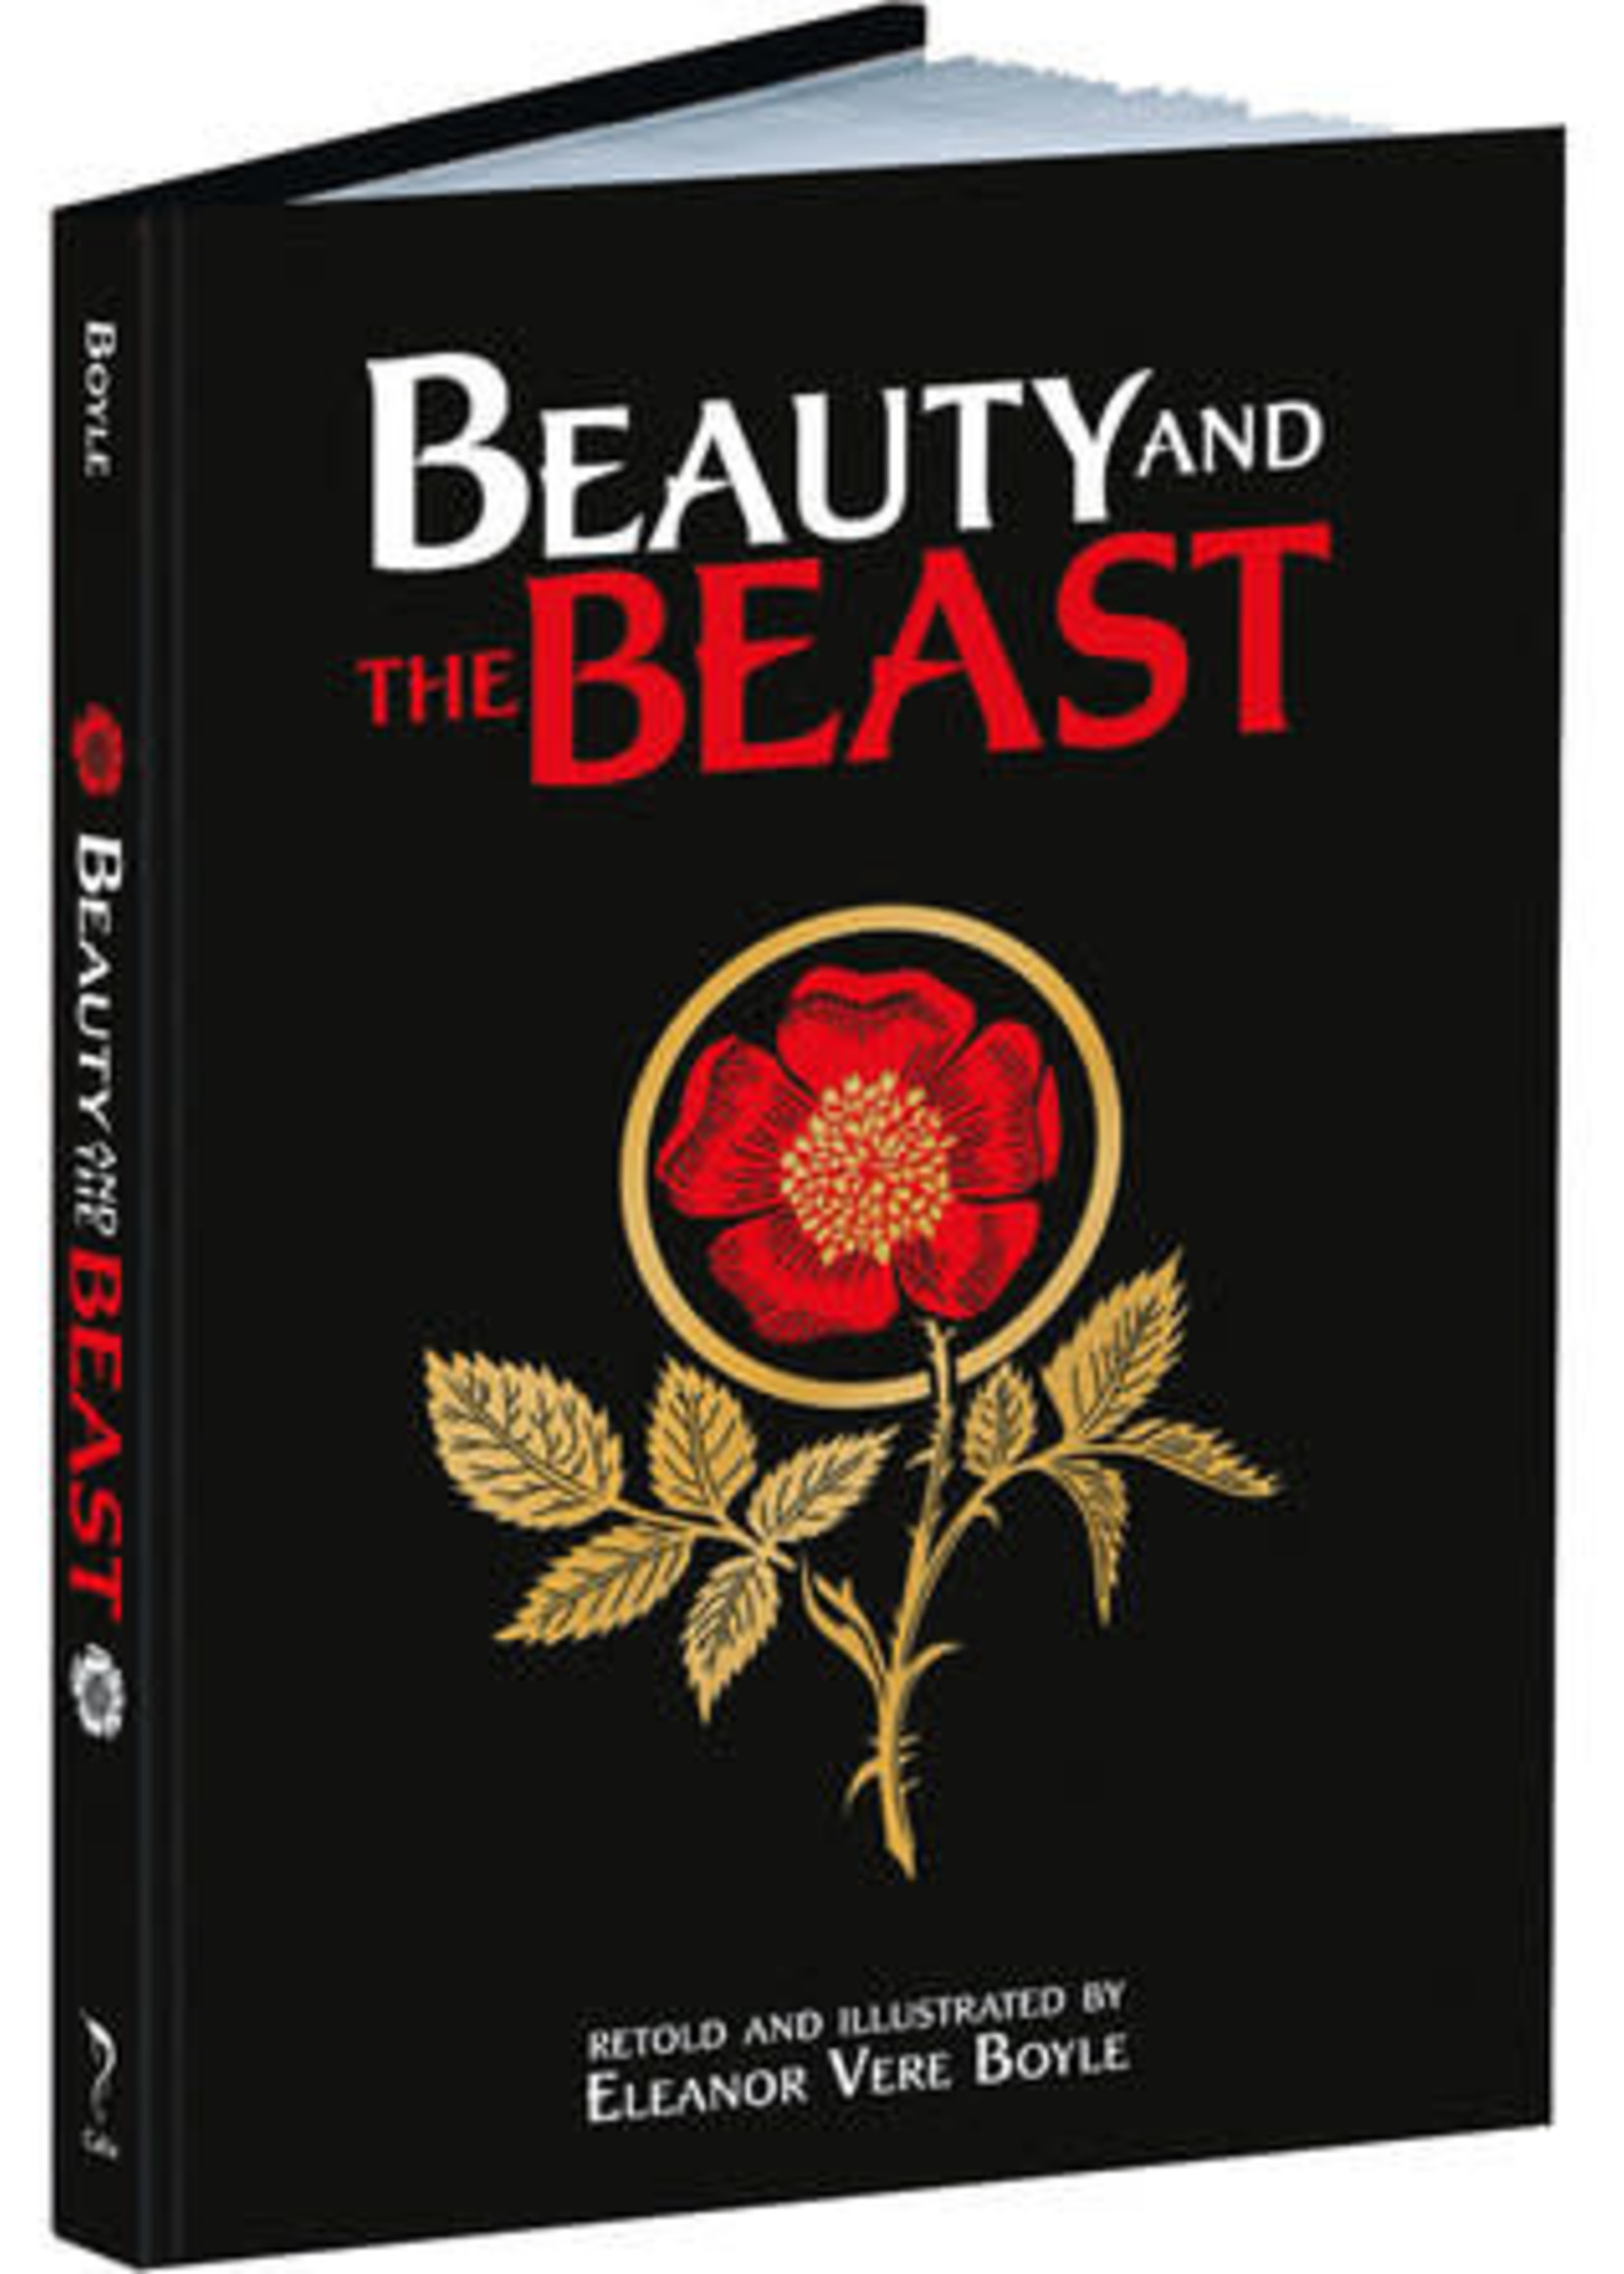 Beauty and the Beast by Eleanor Vere Boyle